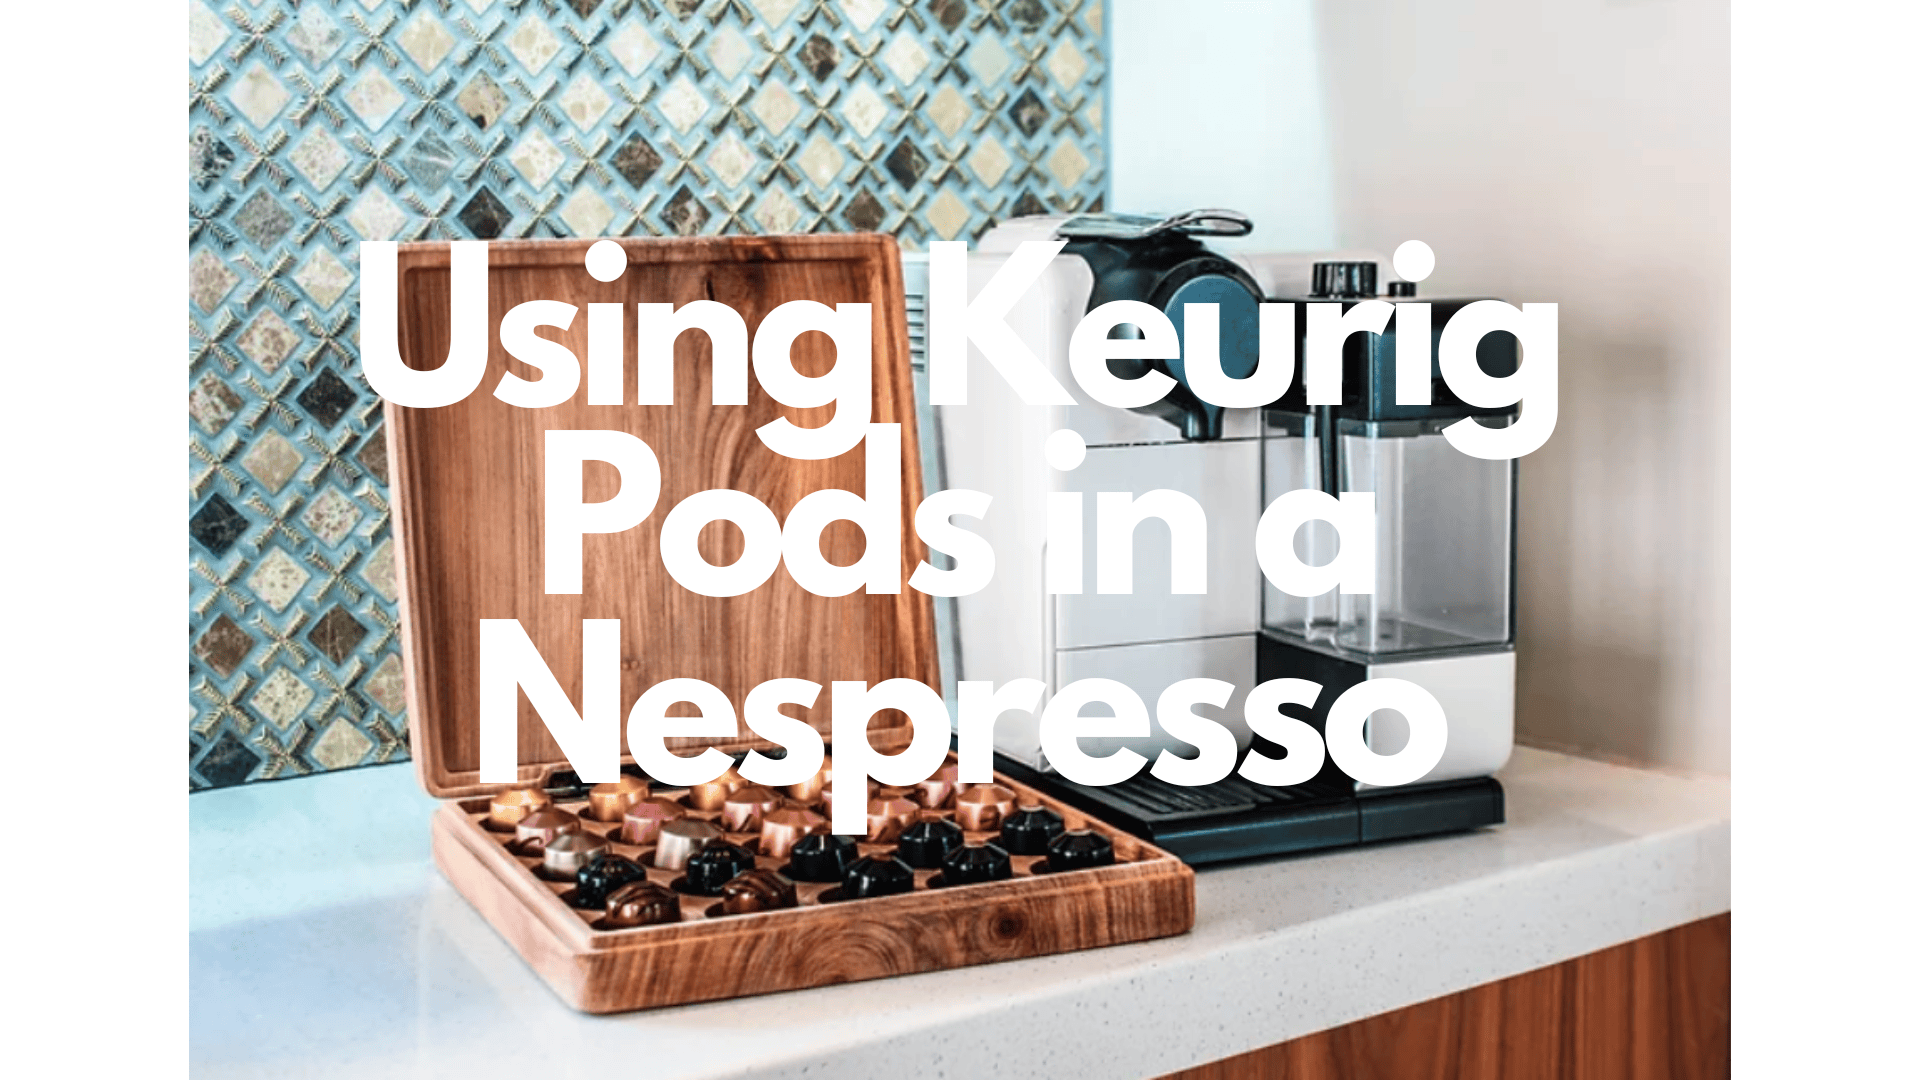 Can You Use Nespresso Pods in a Keurig? (and Vice Versa) – Black